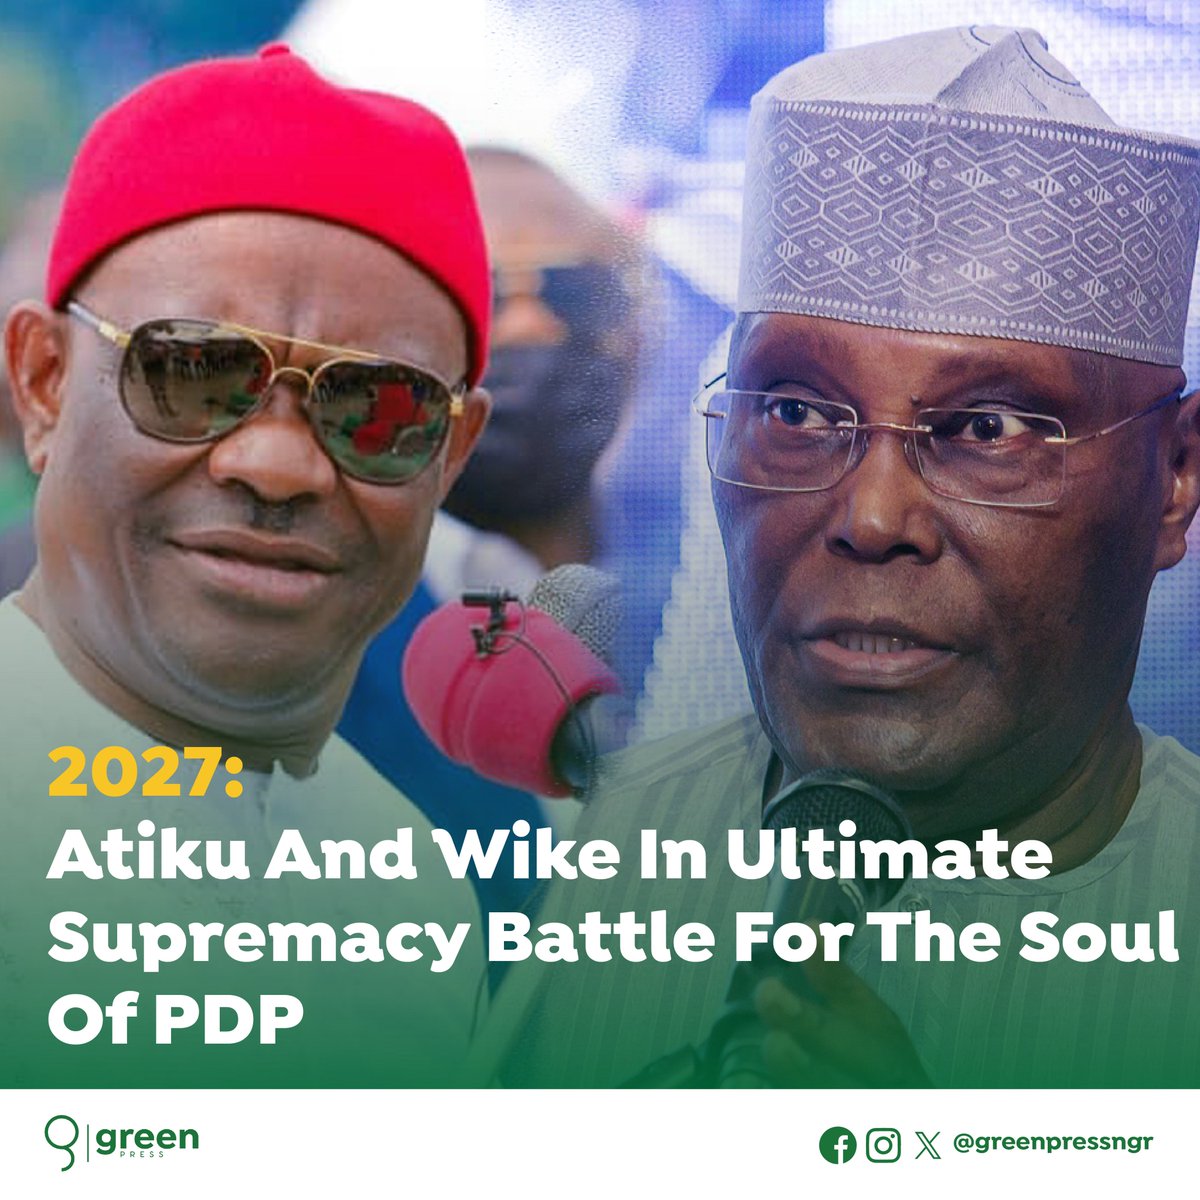 2027: Atiku and Wike In Ultimate Supremacy Battle For the Soul of PDP 

For many, the People's Democratic Party (PDP) is now a shadow of its former self.

From a party the founding fathers described as the biggest in Africa with the capability of ruling Nigeria uninterrupted for…